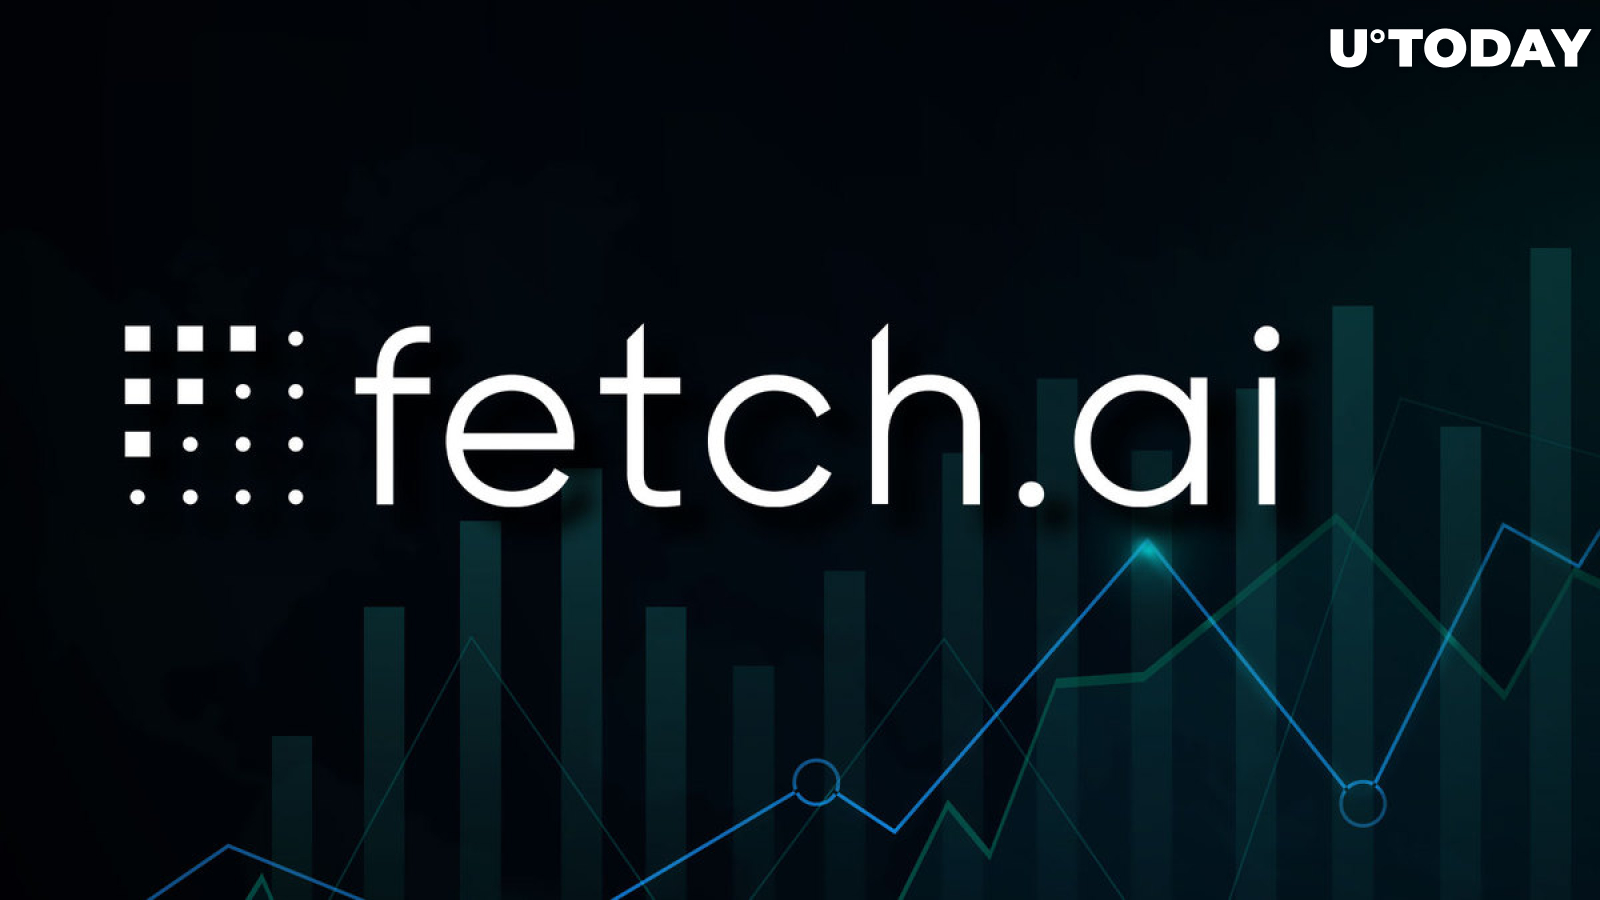 Fetch.ai (FET) up 28%, Three Reasons Why Its Price Is Blowing Up